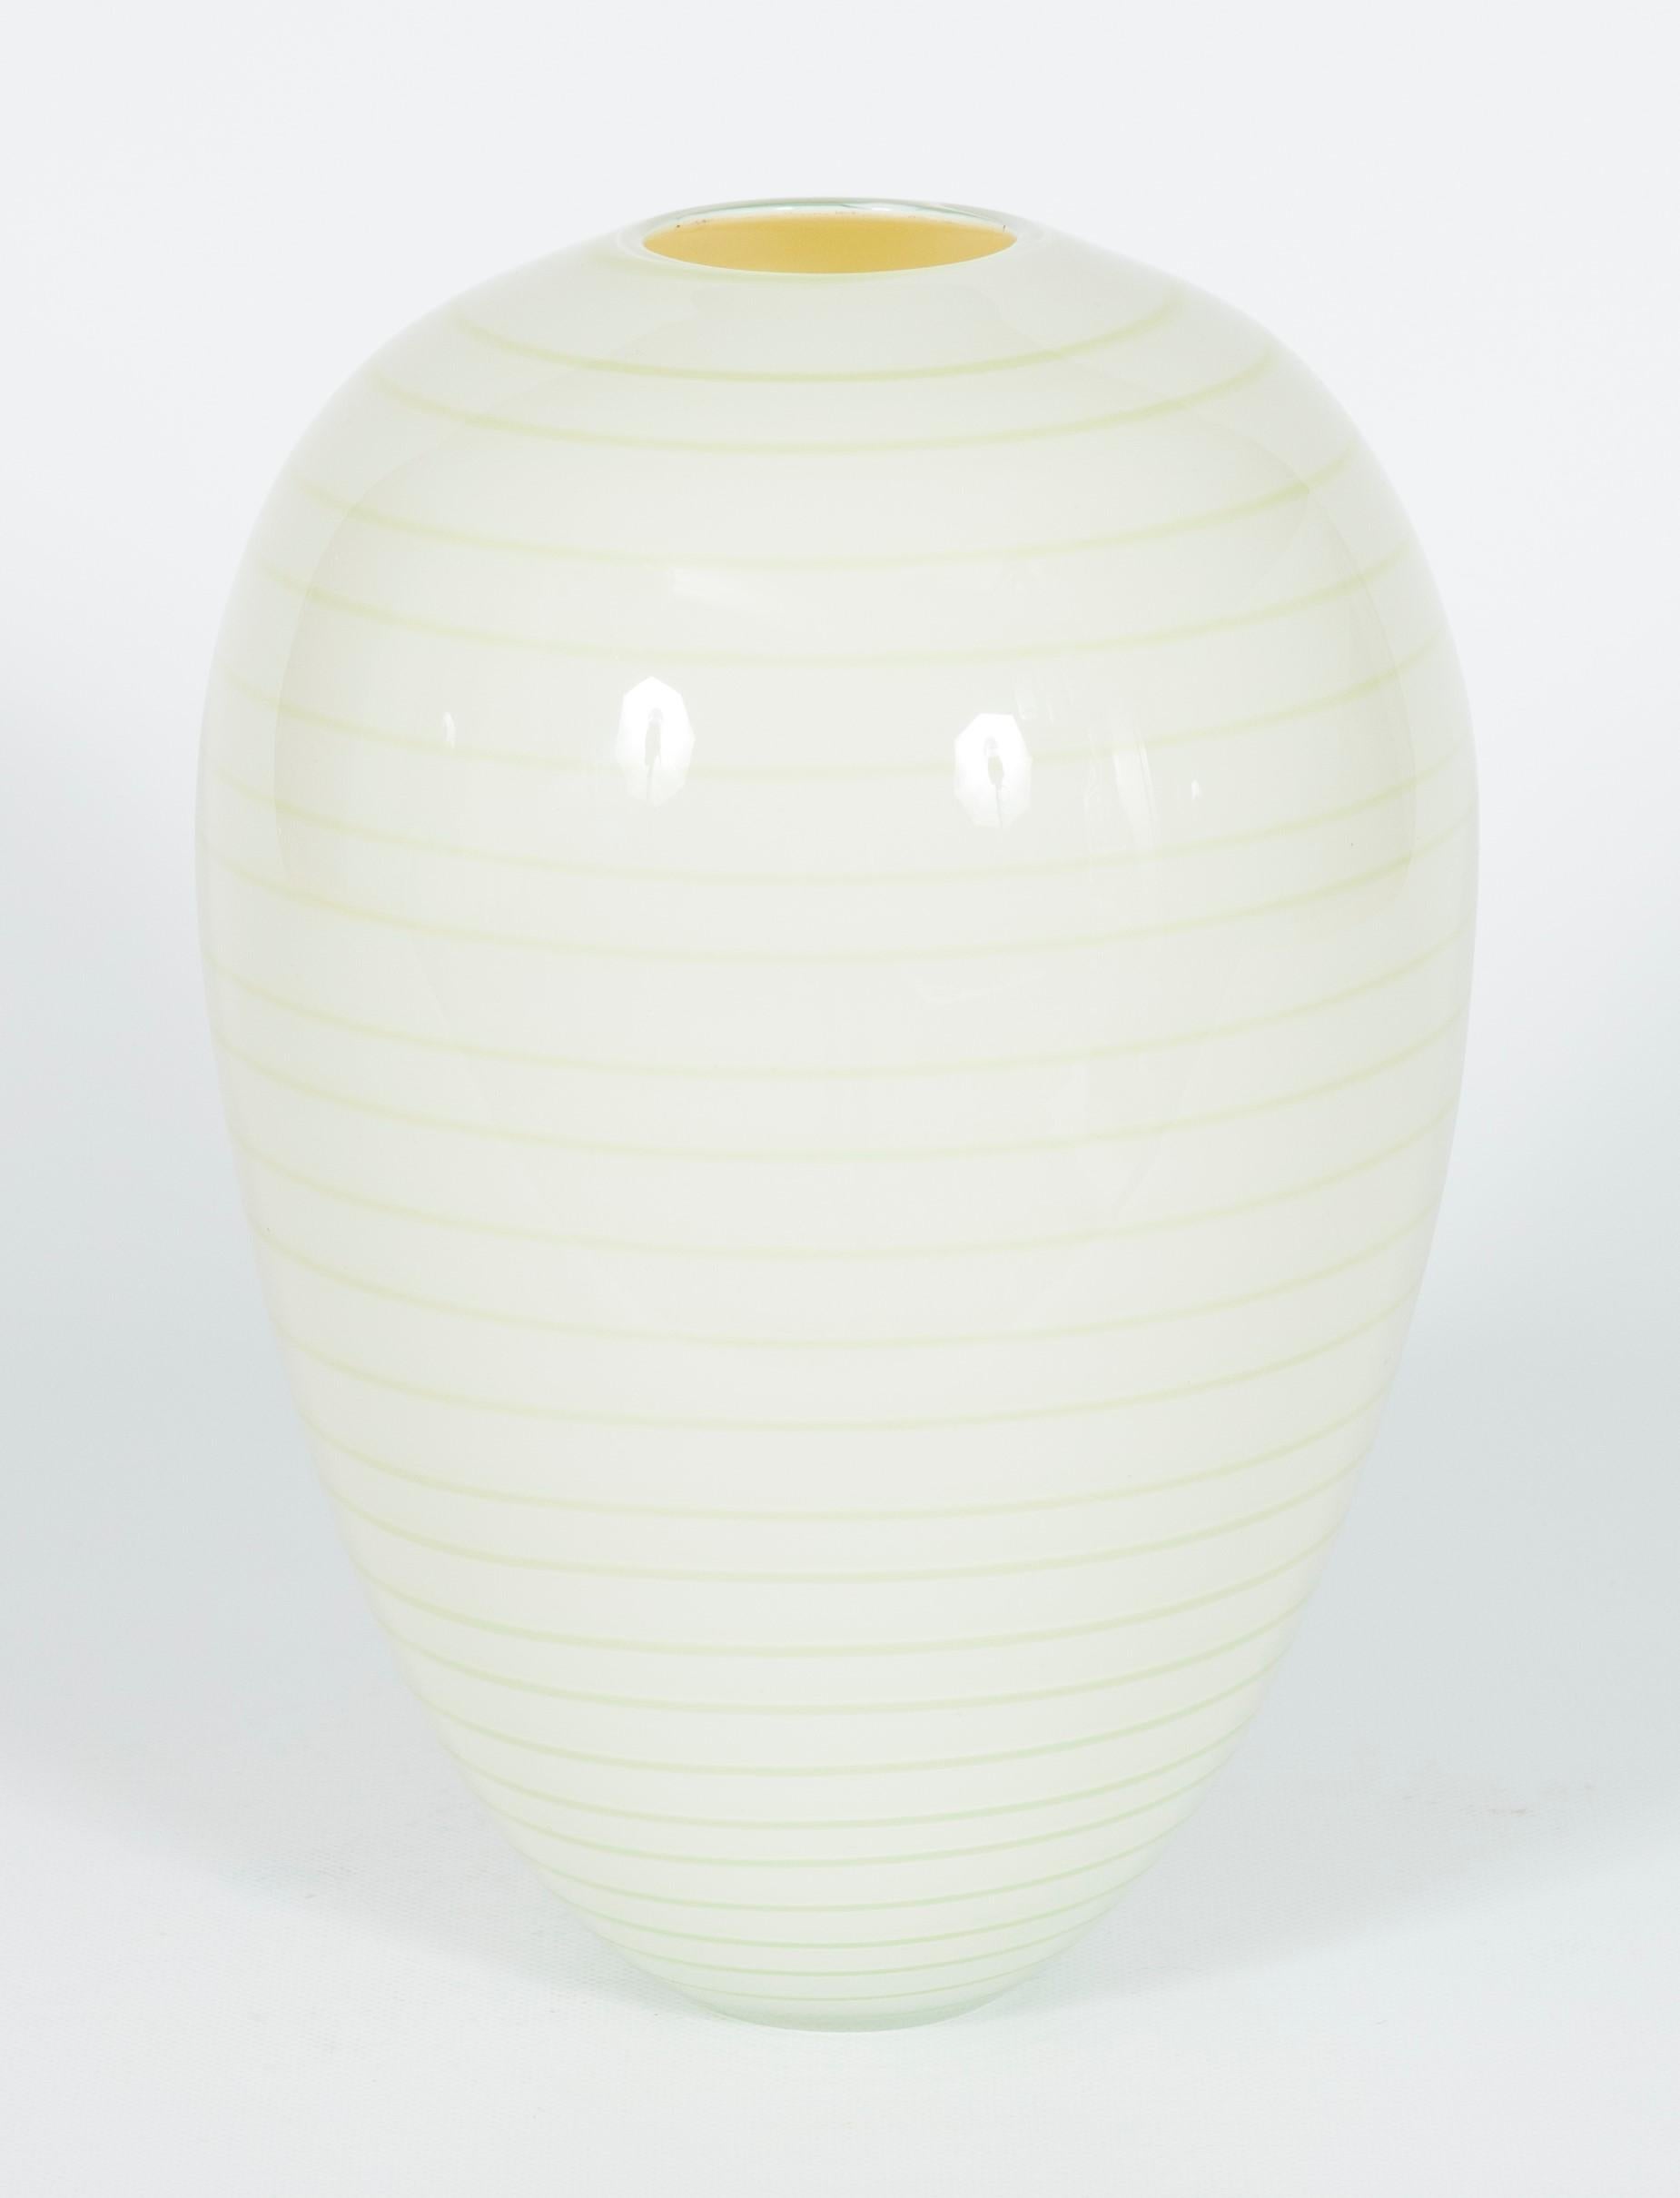 Artistic ornament vase in white Murano glass, attributed to Seguso, 1960s.
The harmoniously rounded oval shape, the delicate cream-white color, and the horizontal green strips made with sunken glass canes give a true touch of Italian creativity and